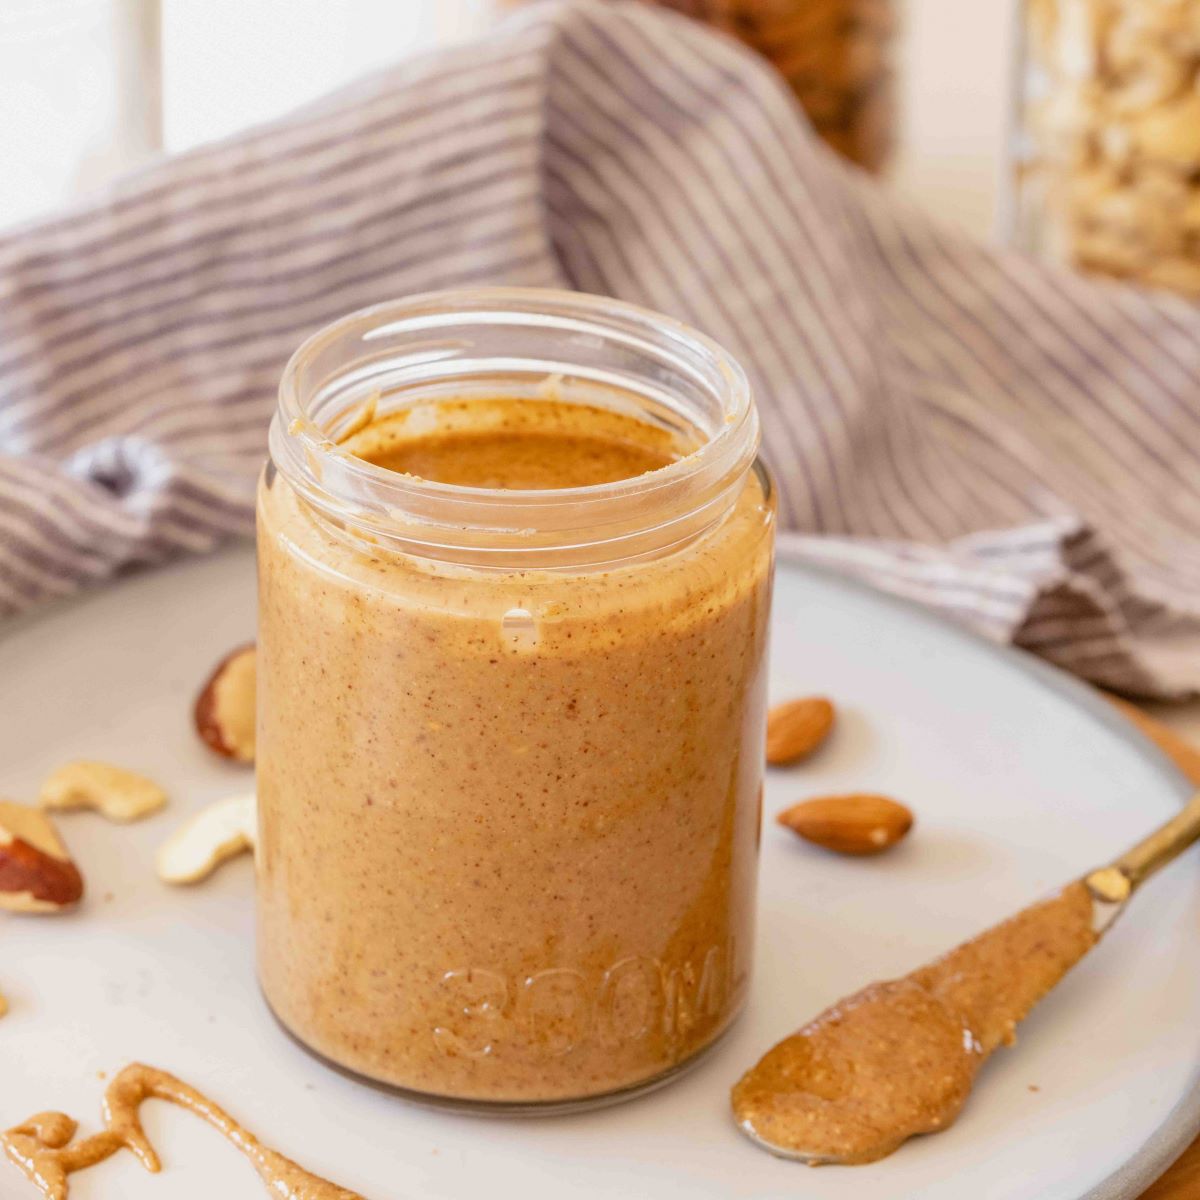 How To Store Homemade Nut Butter